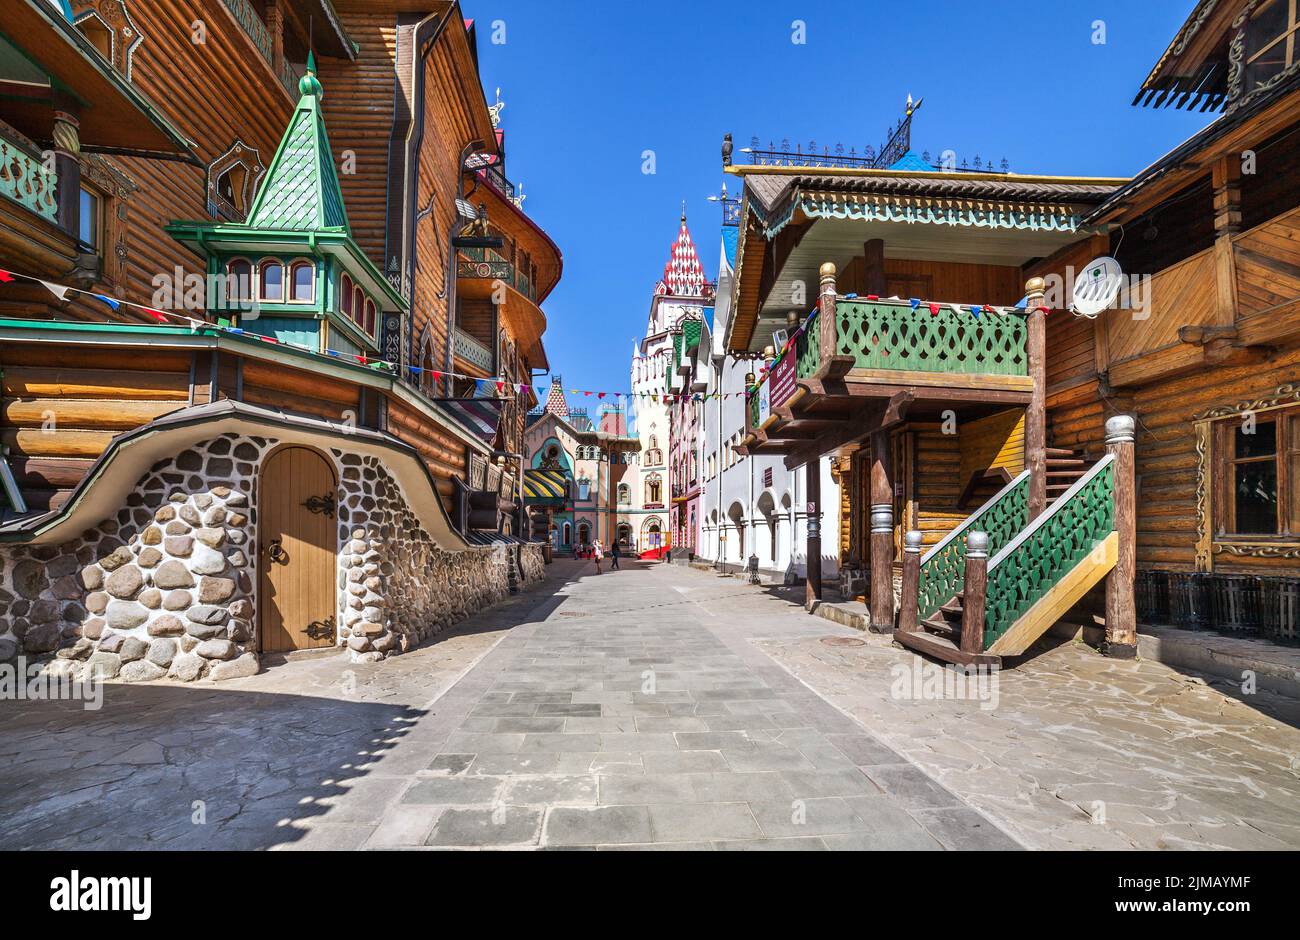 The courtyard of the Kremlin in Izmailovo, Moscow, Russia. Stock Photo